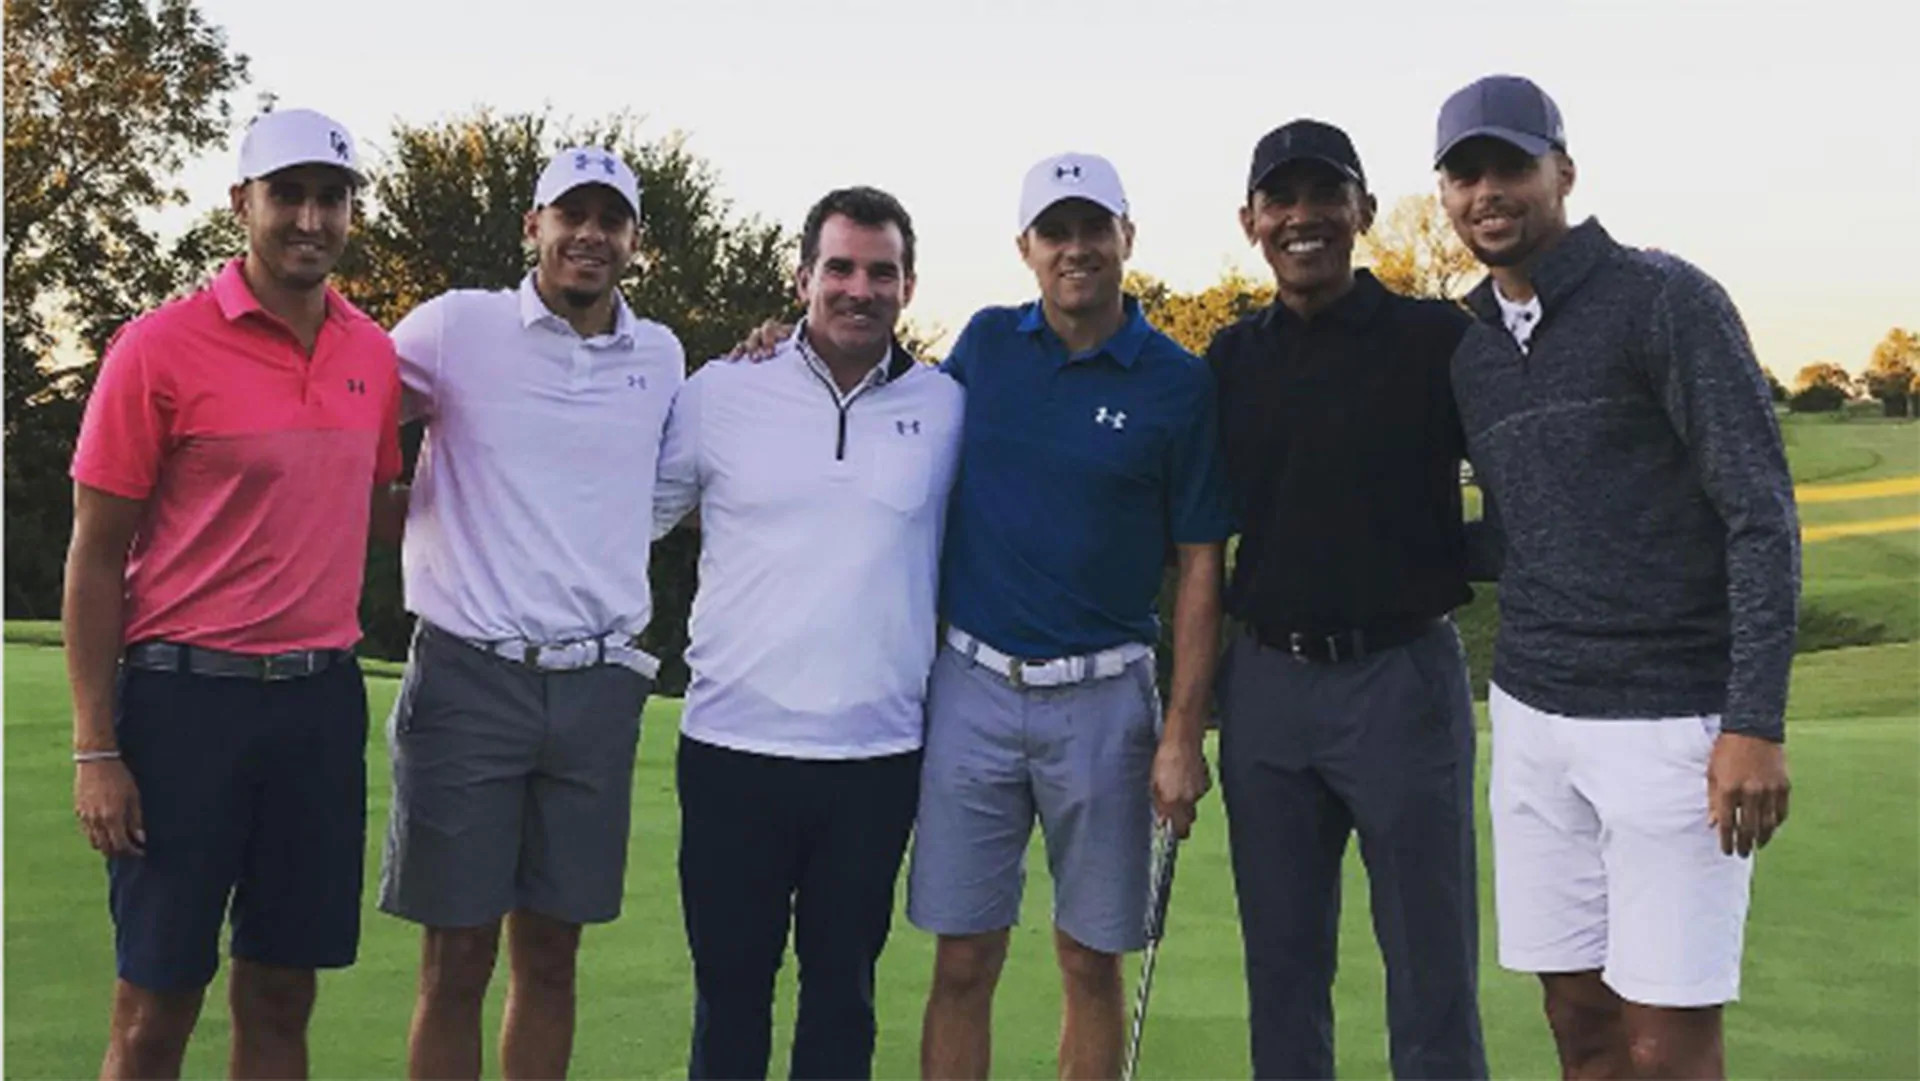 Spieth tees it up with Obama, Curry in Texas